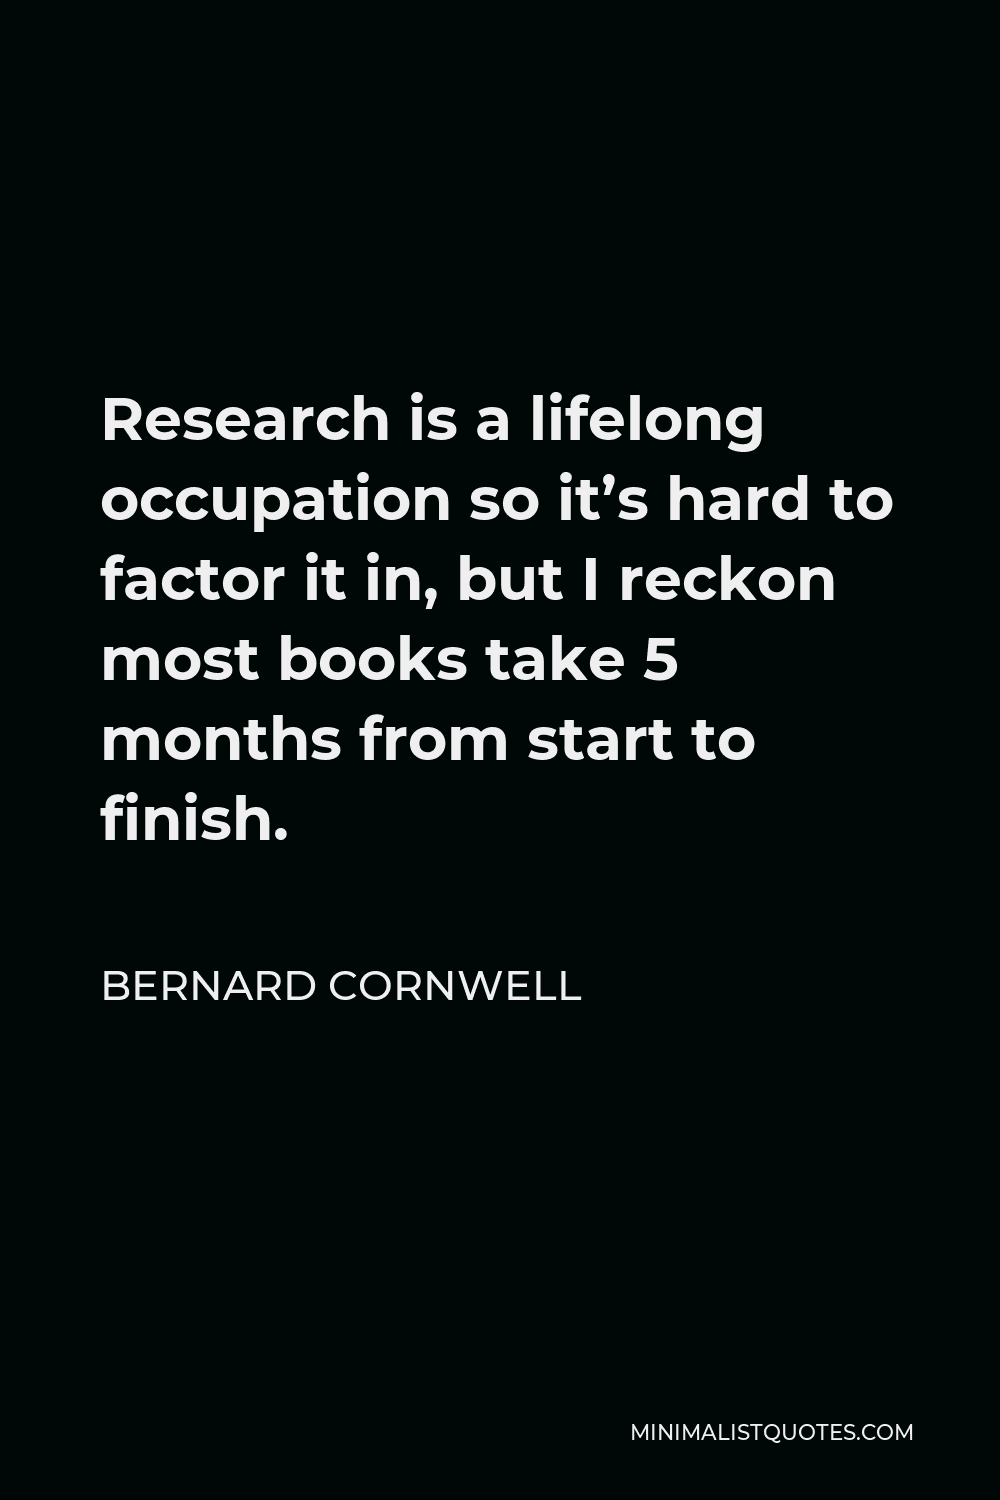 Bernard Cornwell Quote - Research is a lifelong occupation so it’s hard to factor it in, but I reckon most books take 5 months from start to finish.